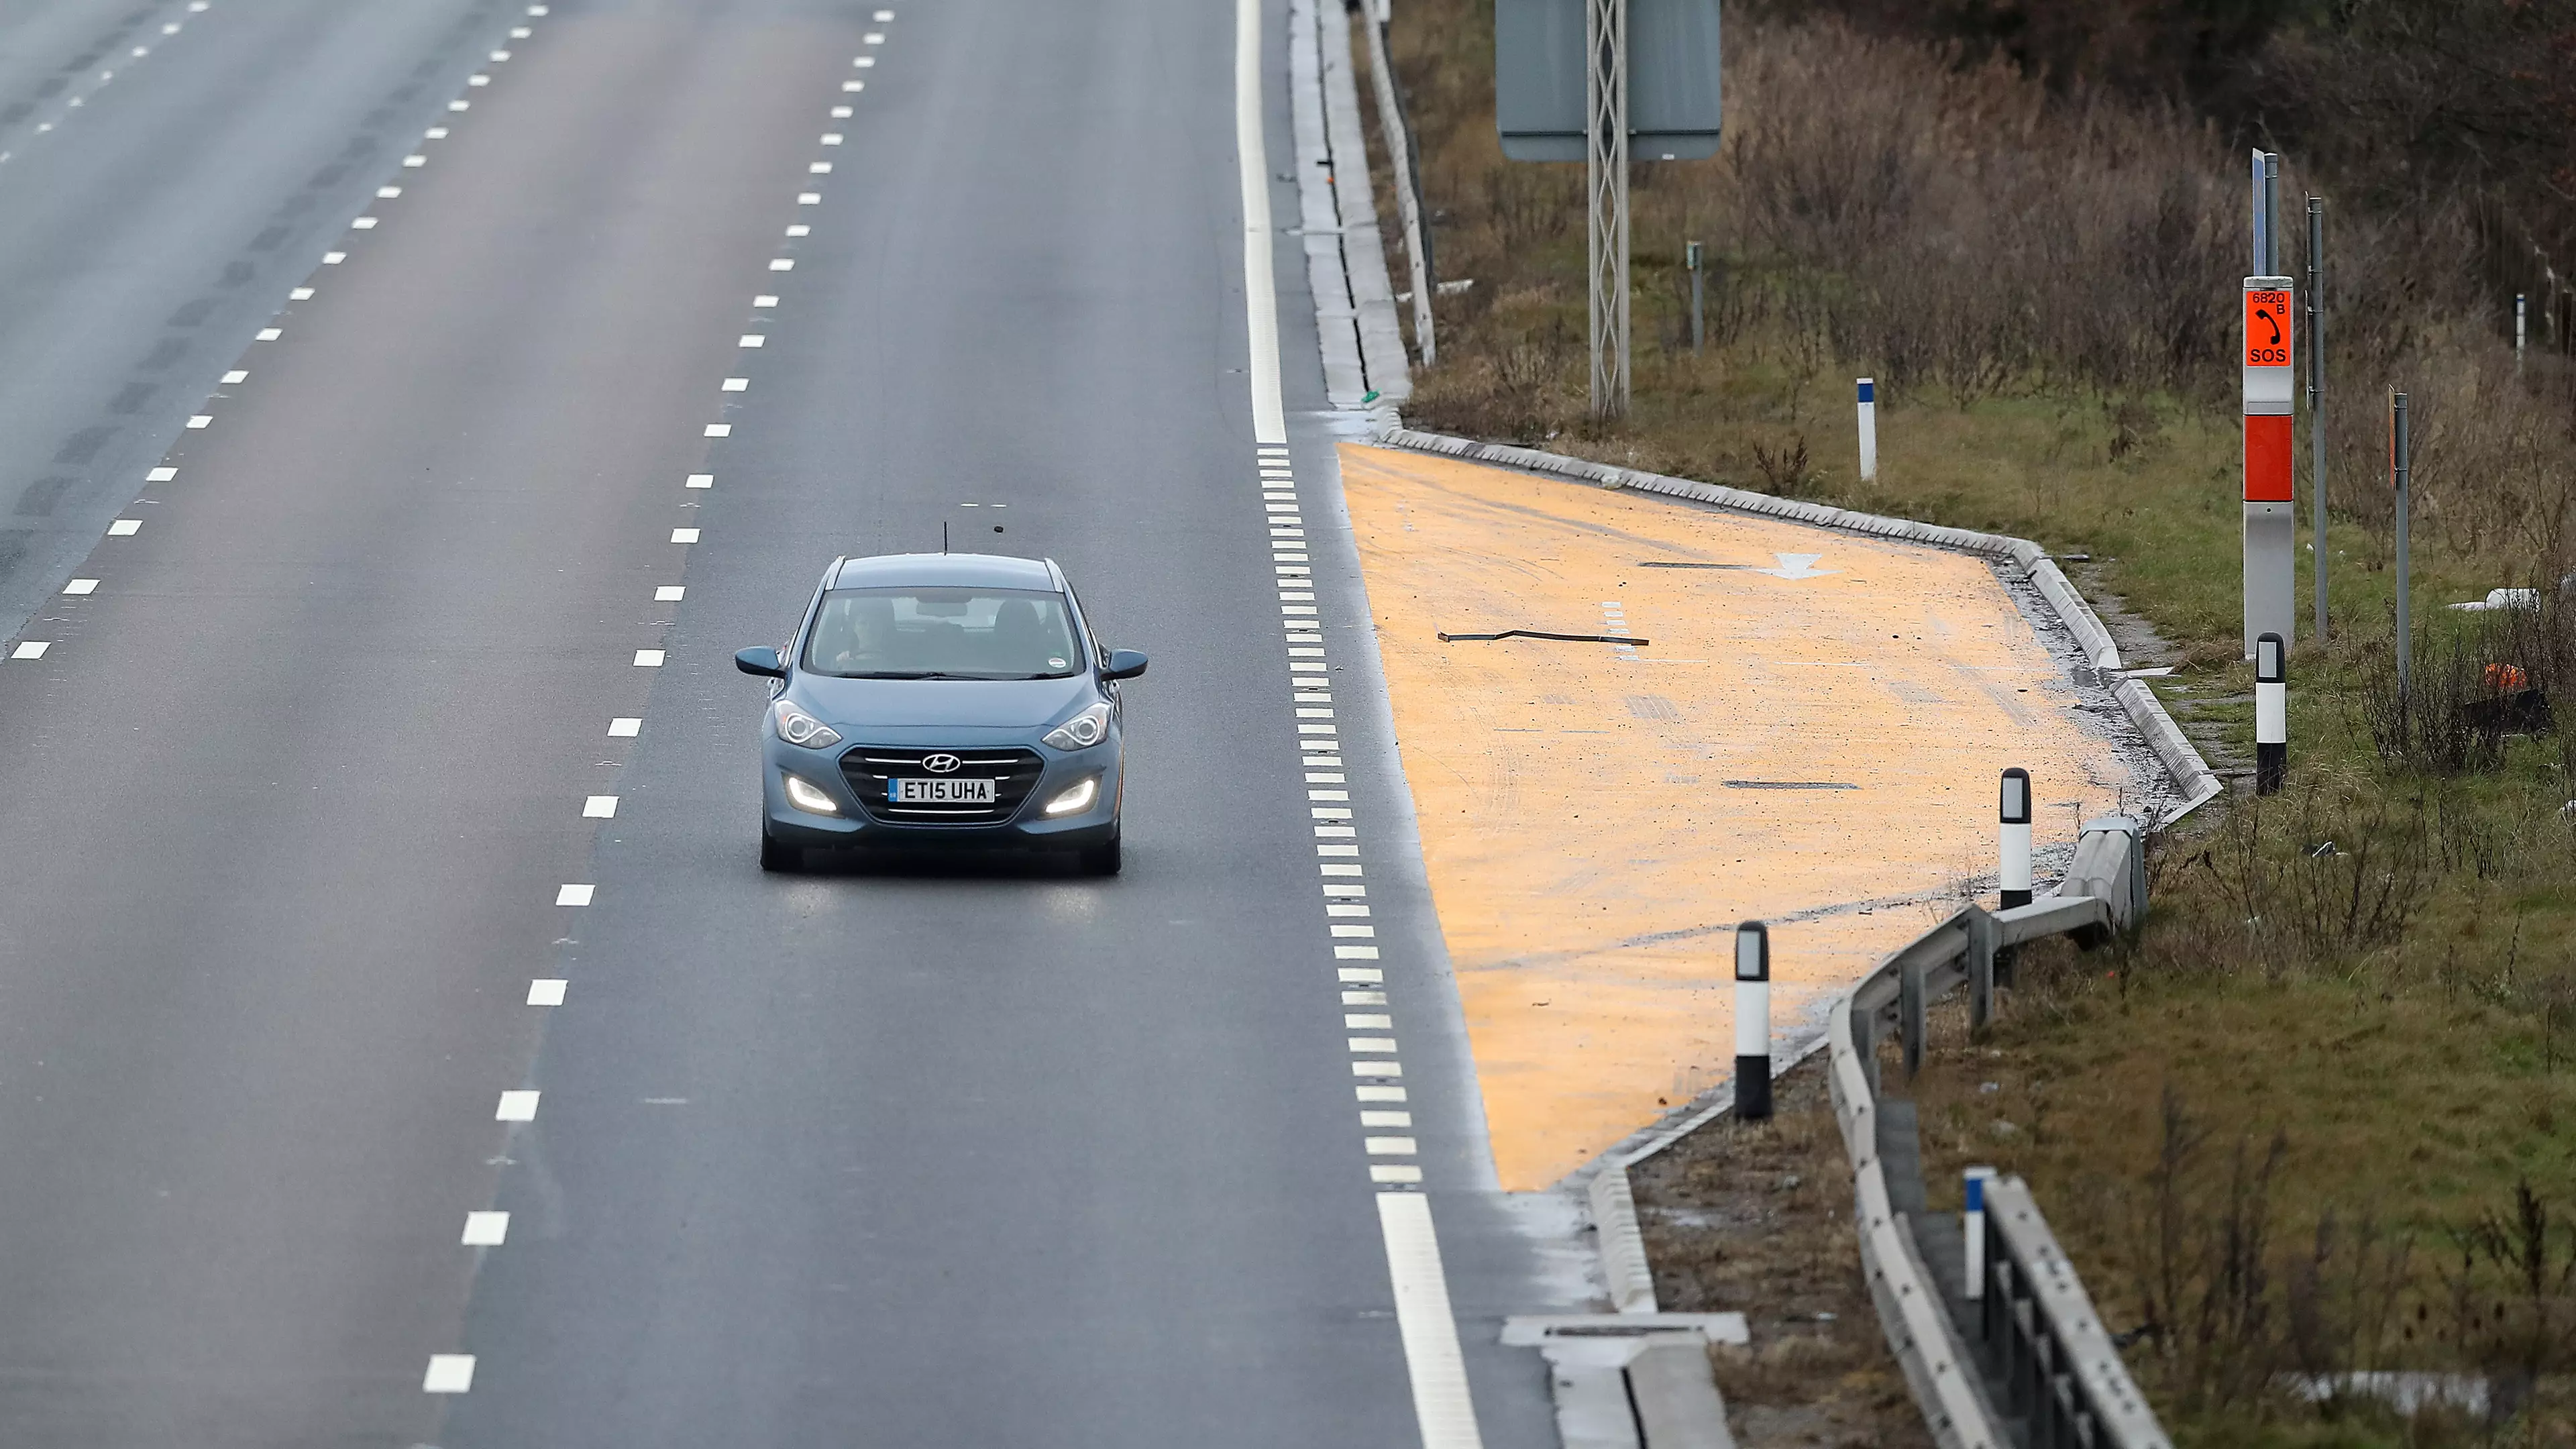 Britain Could Be First Country To Allow Automatic Lane Keeping Technology On Motorways